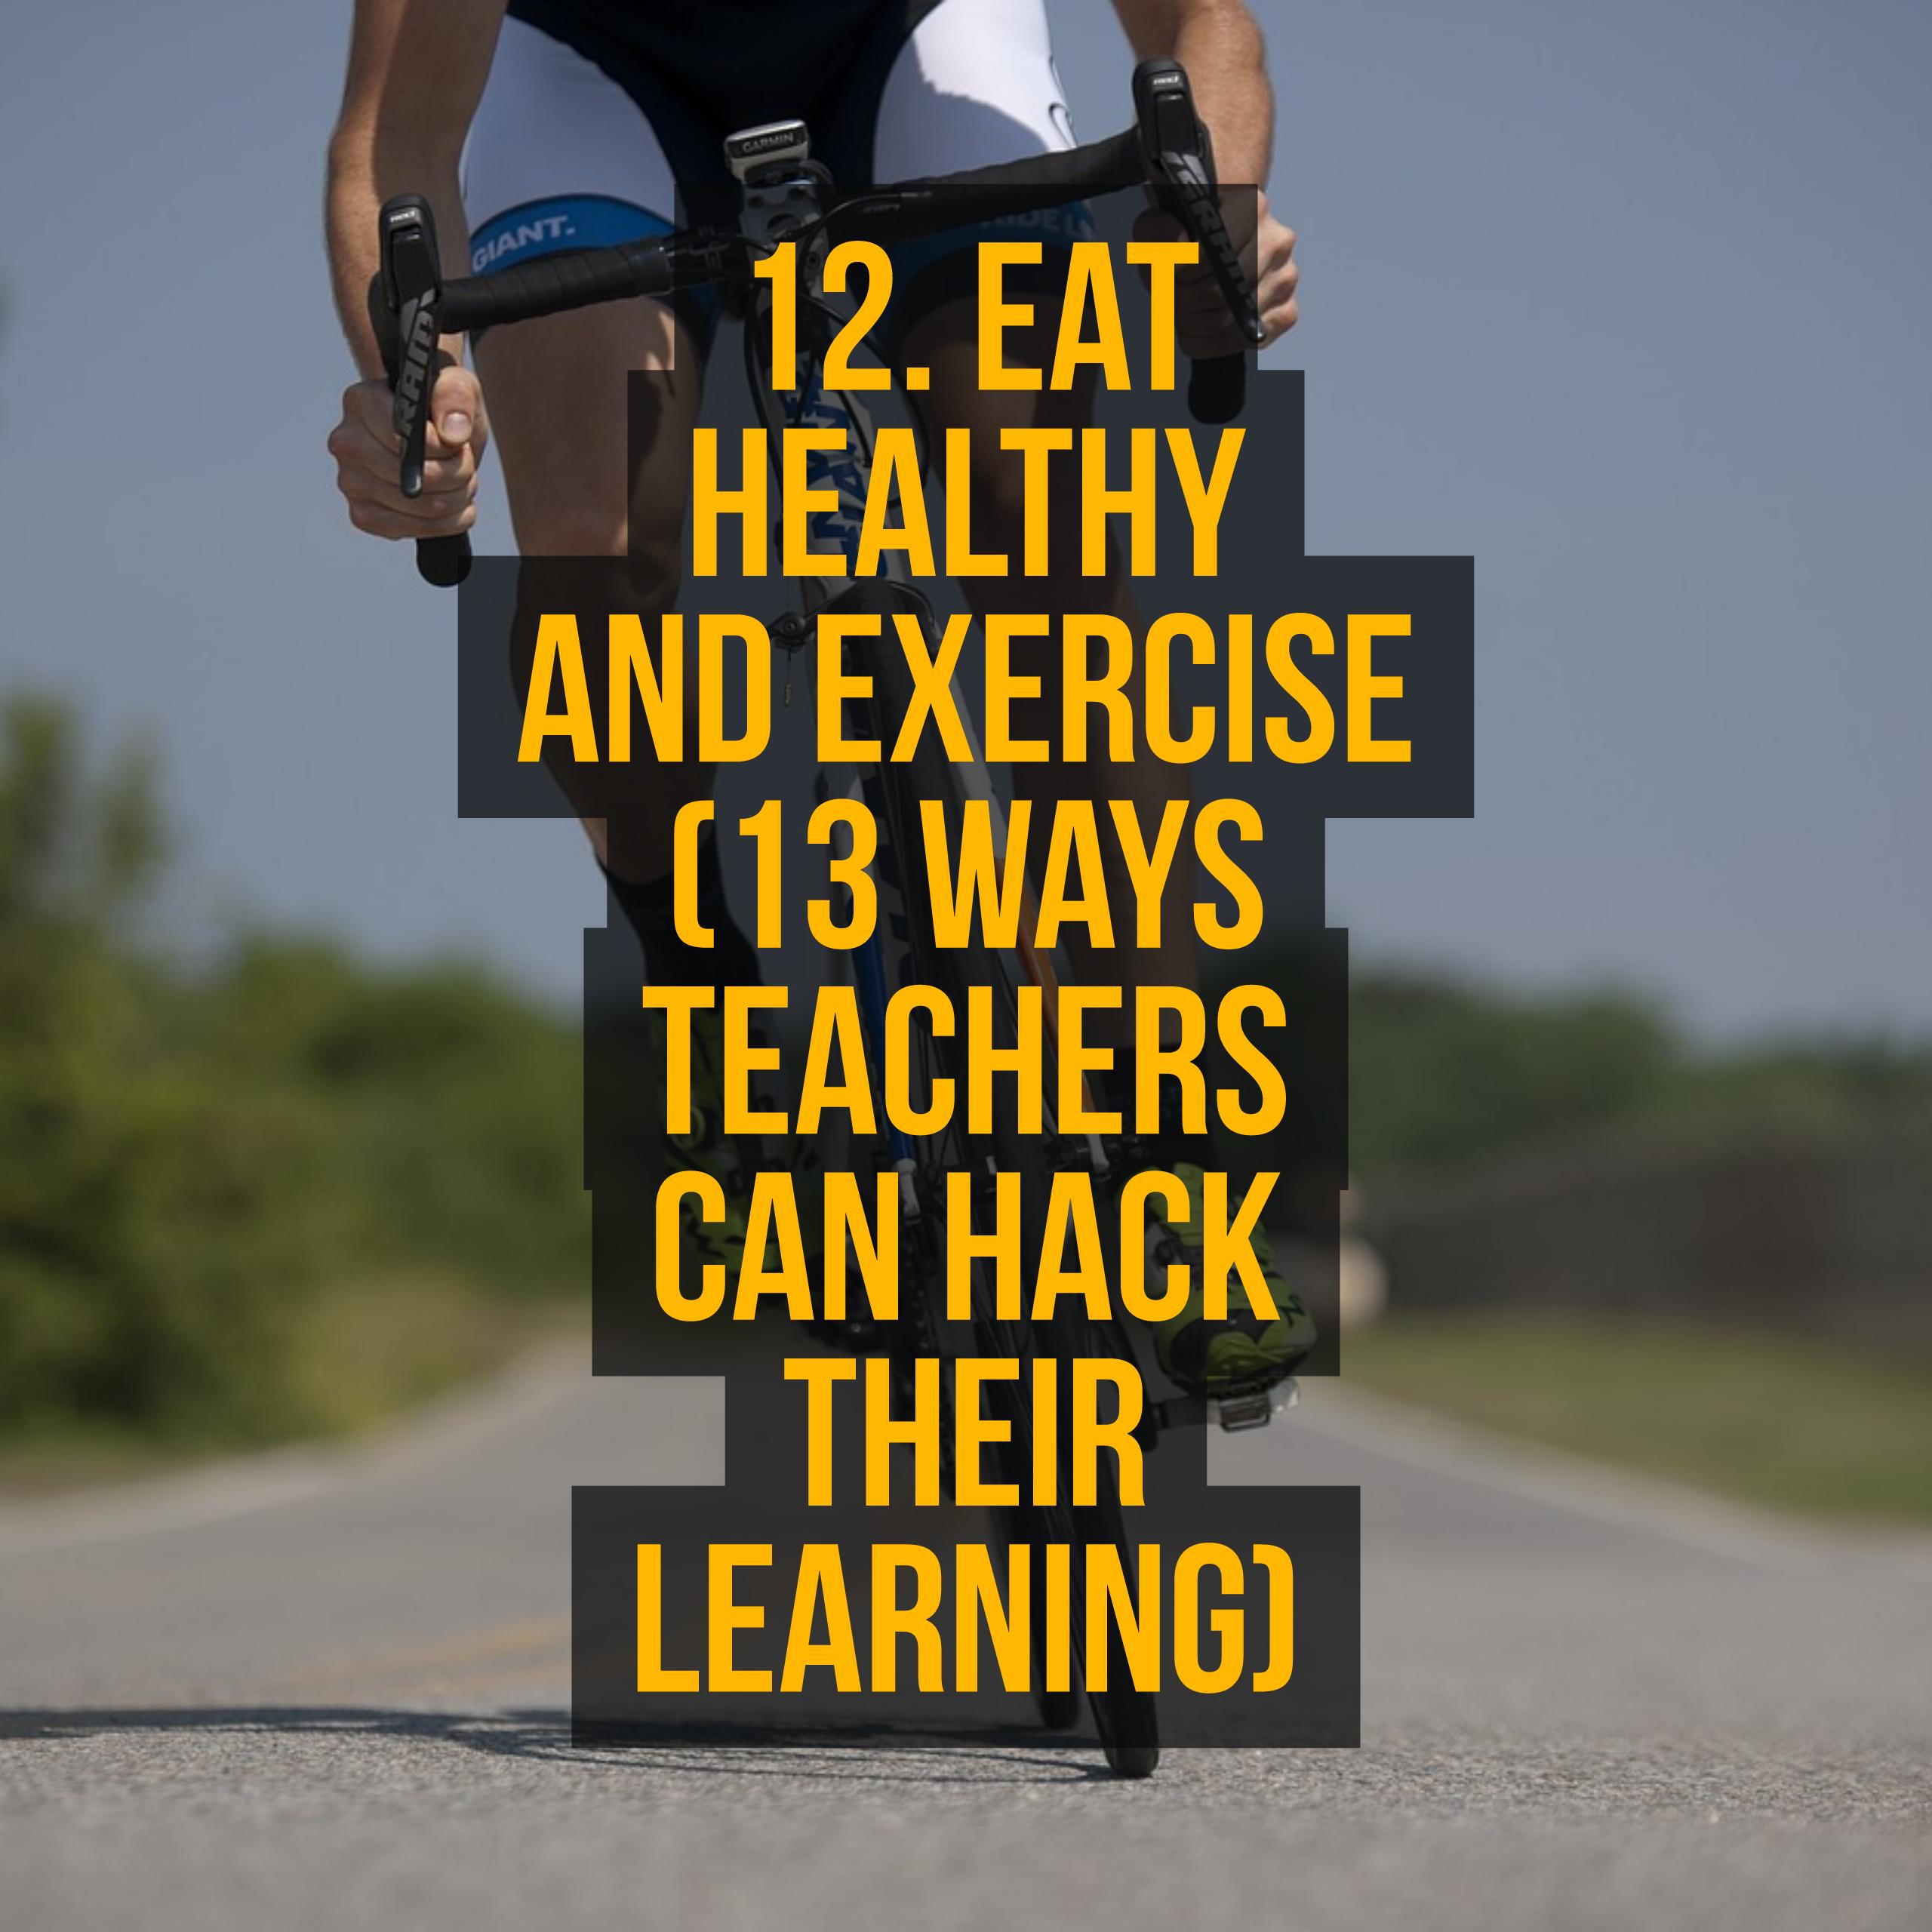 12. Eat healthy and Exercise (13 Ways Teachers Can Hack Their Learning)